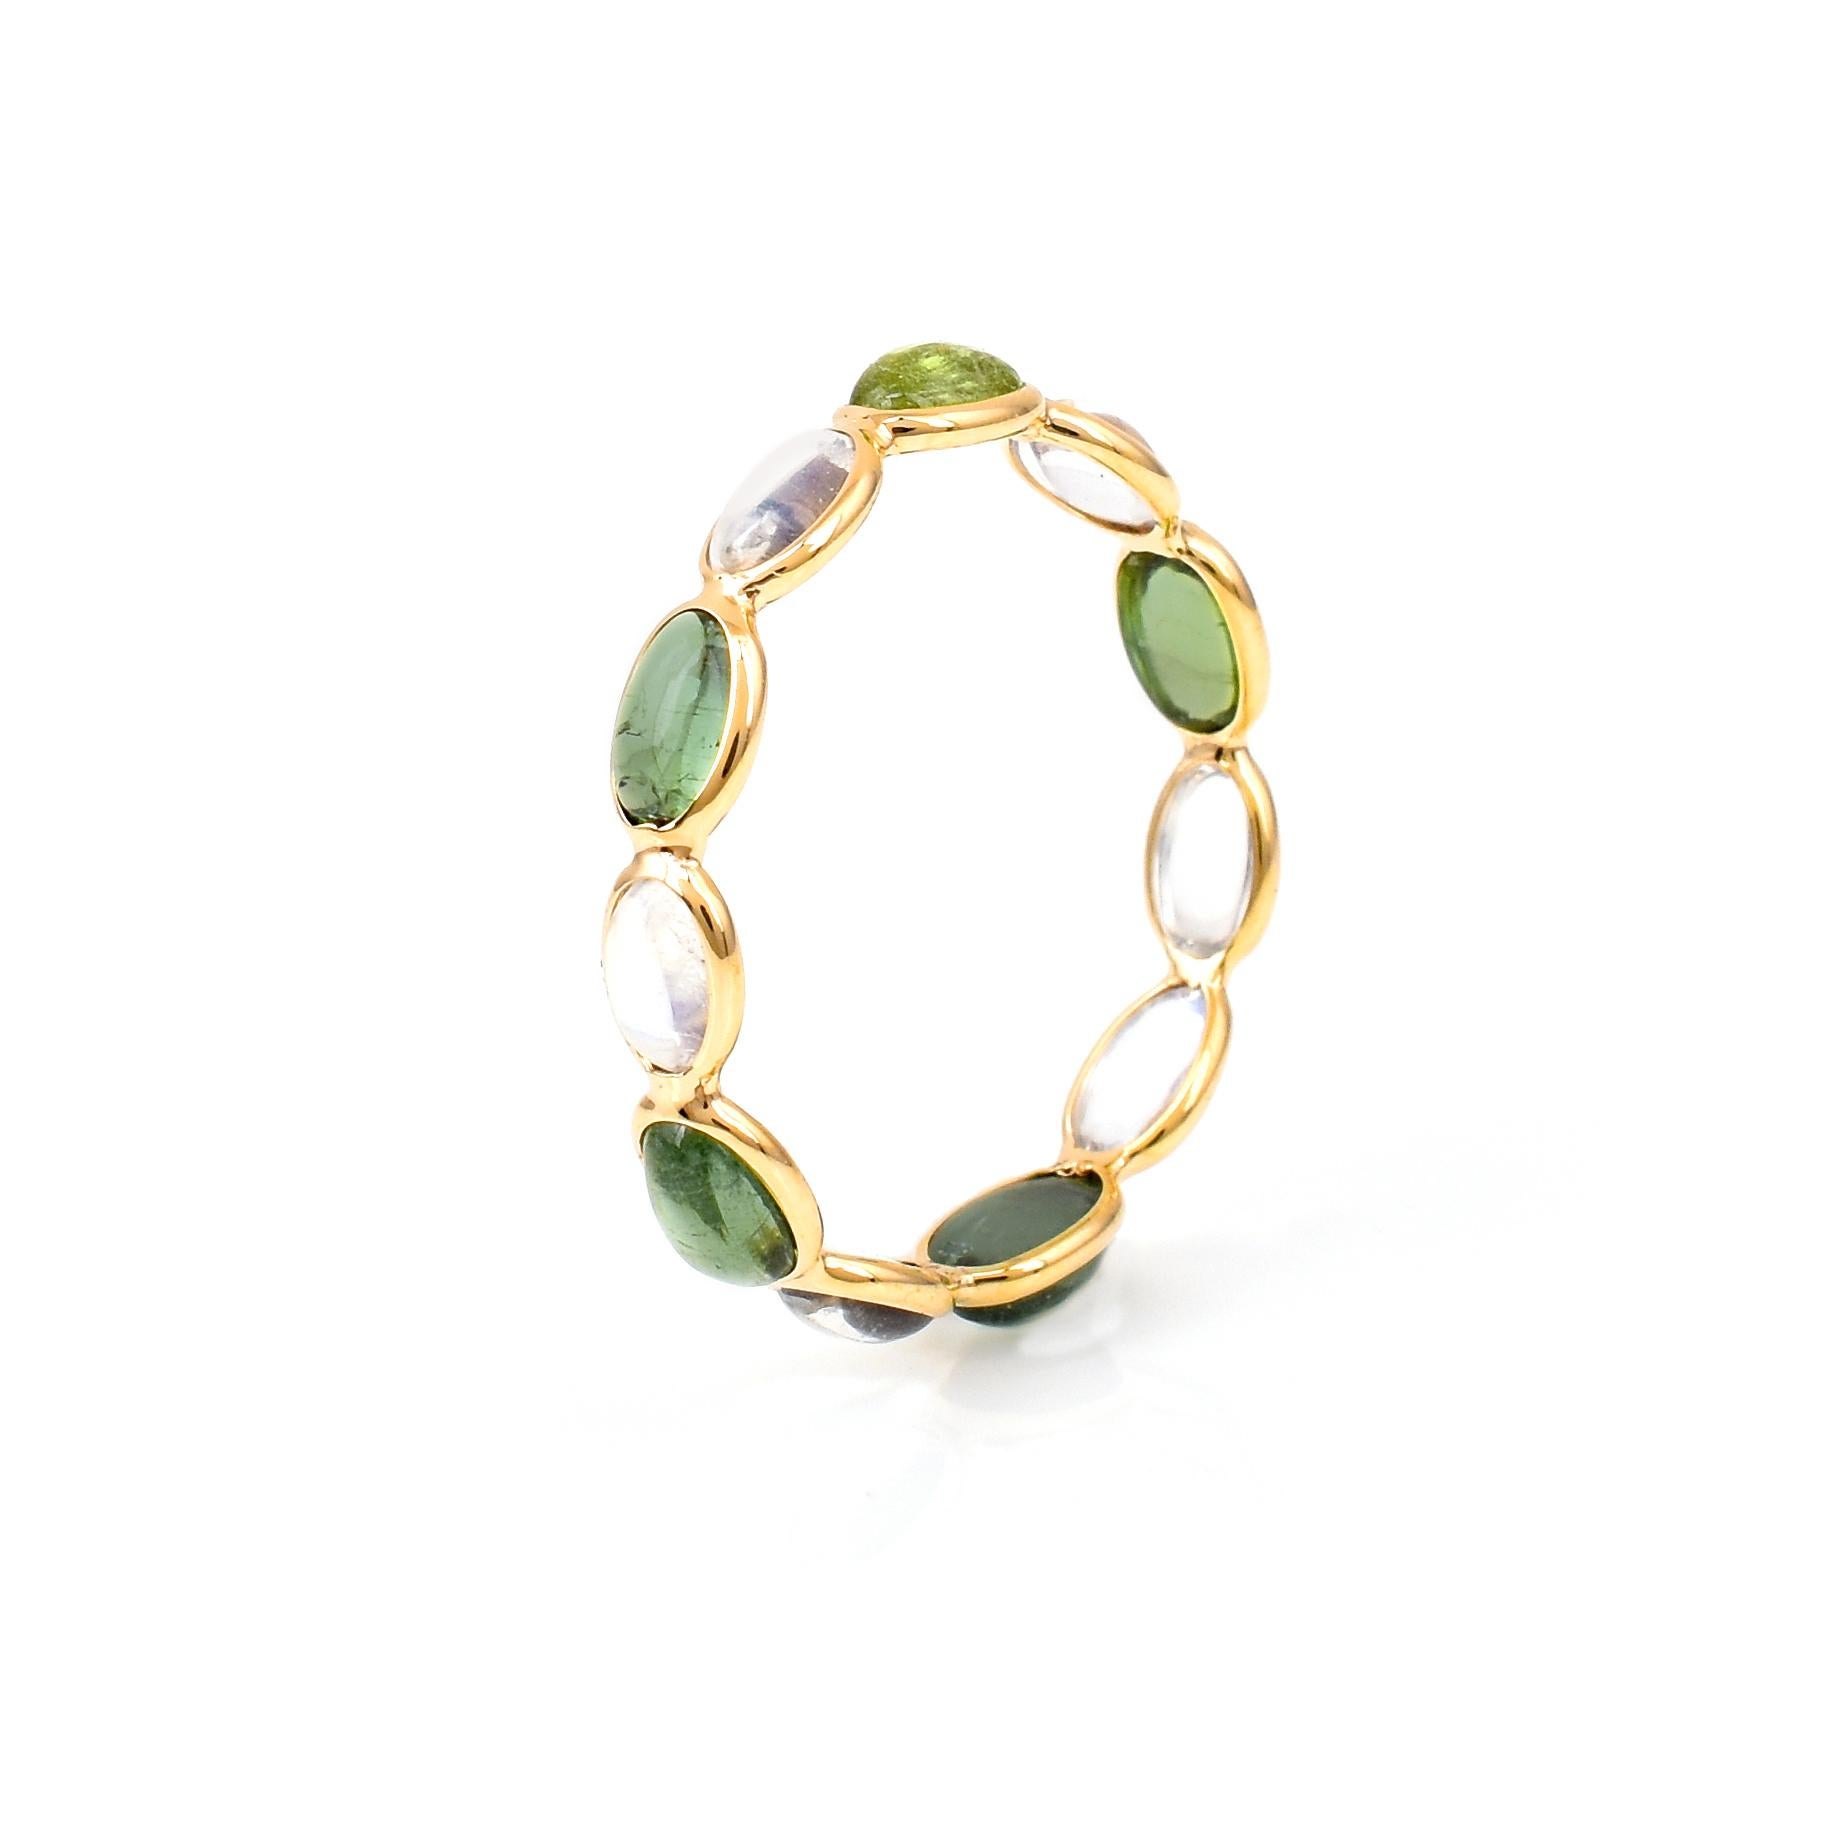 Shape: Oval Cabochon

Stones: Rainbow Moonstone and Green Tourmaline 

Metal: 14 Karat Yellow Gold (can be customized)

Style: Single Line Band

Ring Size: US 7 (can be customized)

Stone Weight: appx. 3.25carats of Opal and Pink Tourmaline 

Total